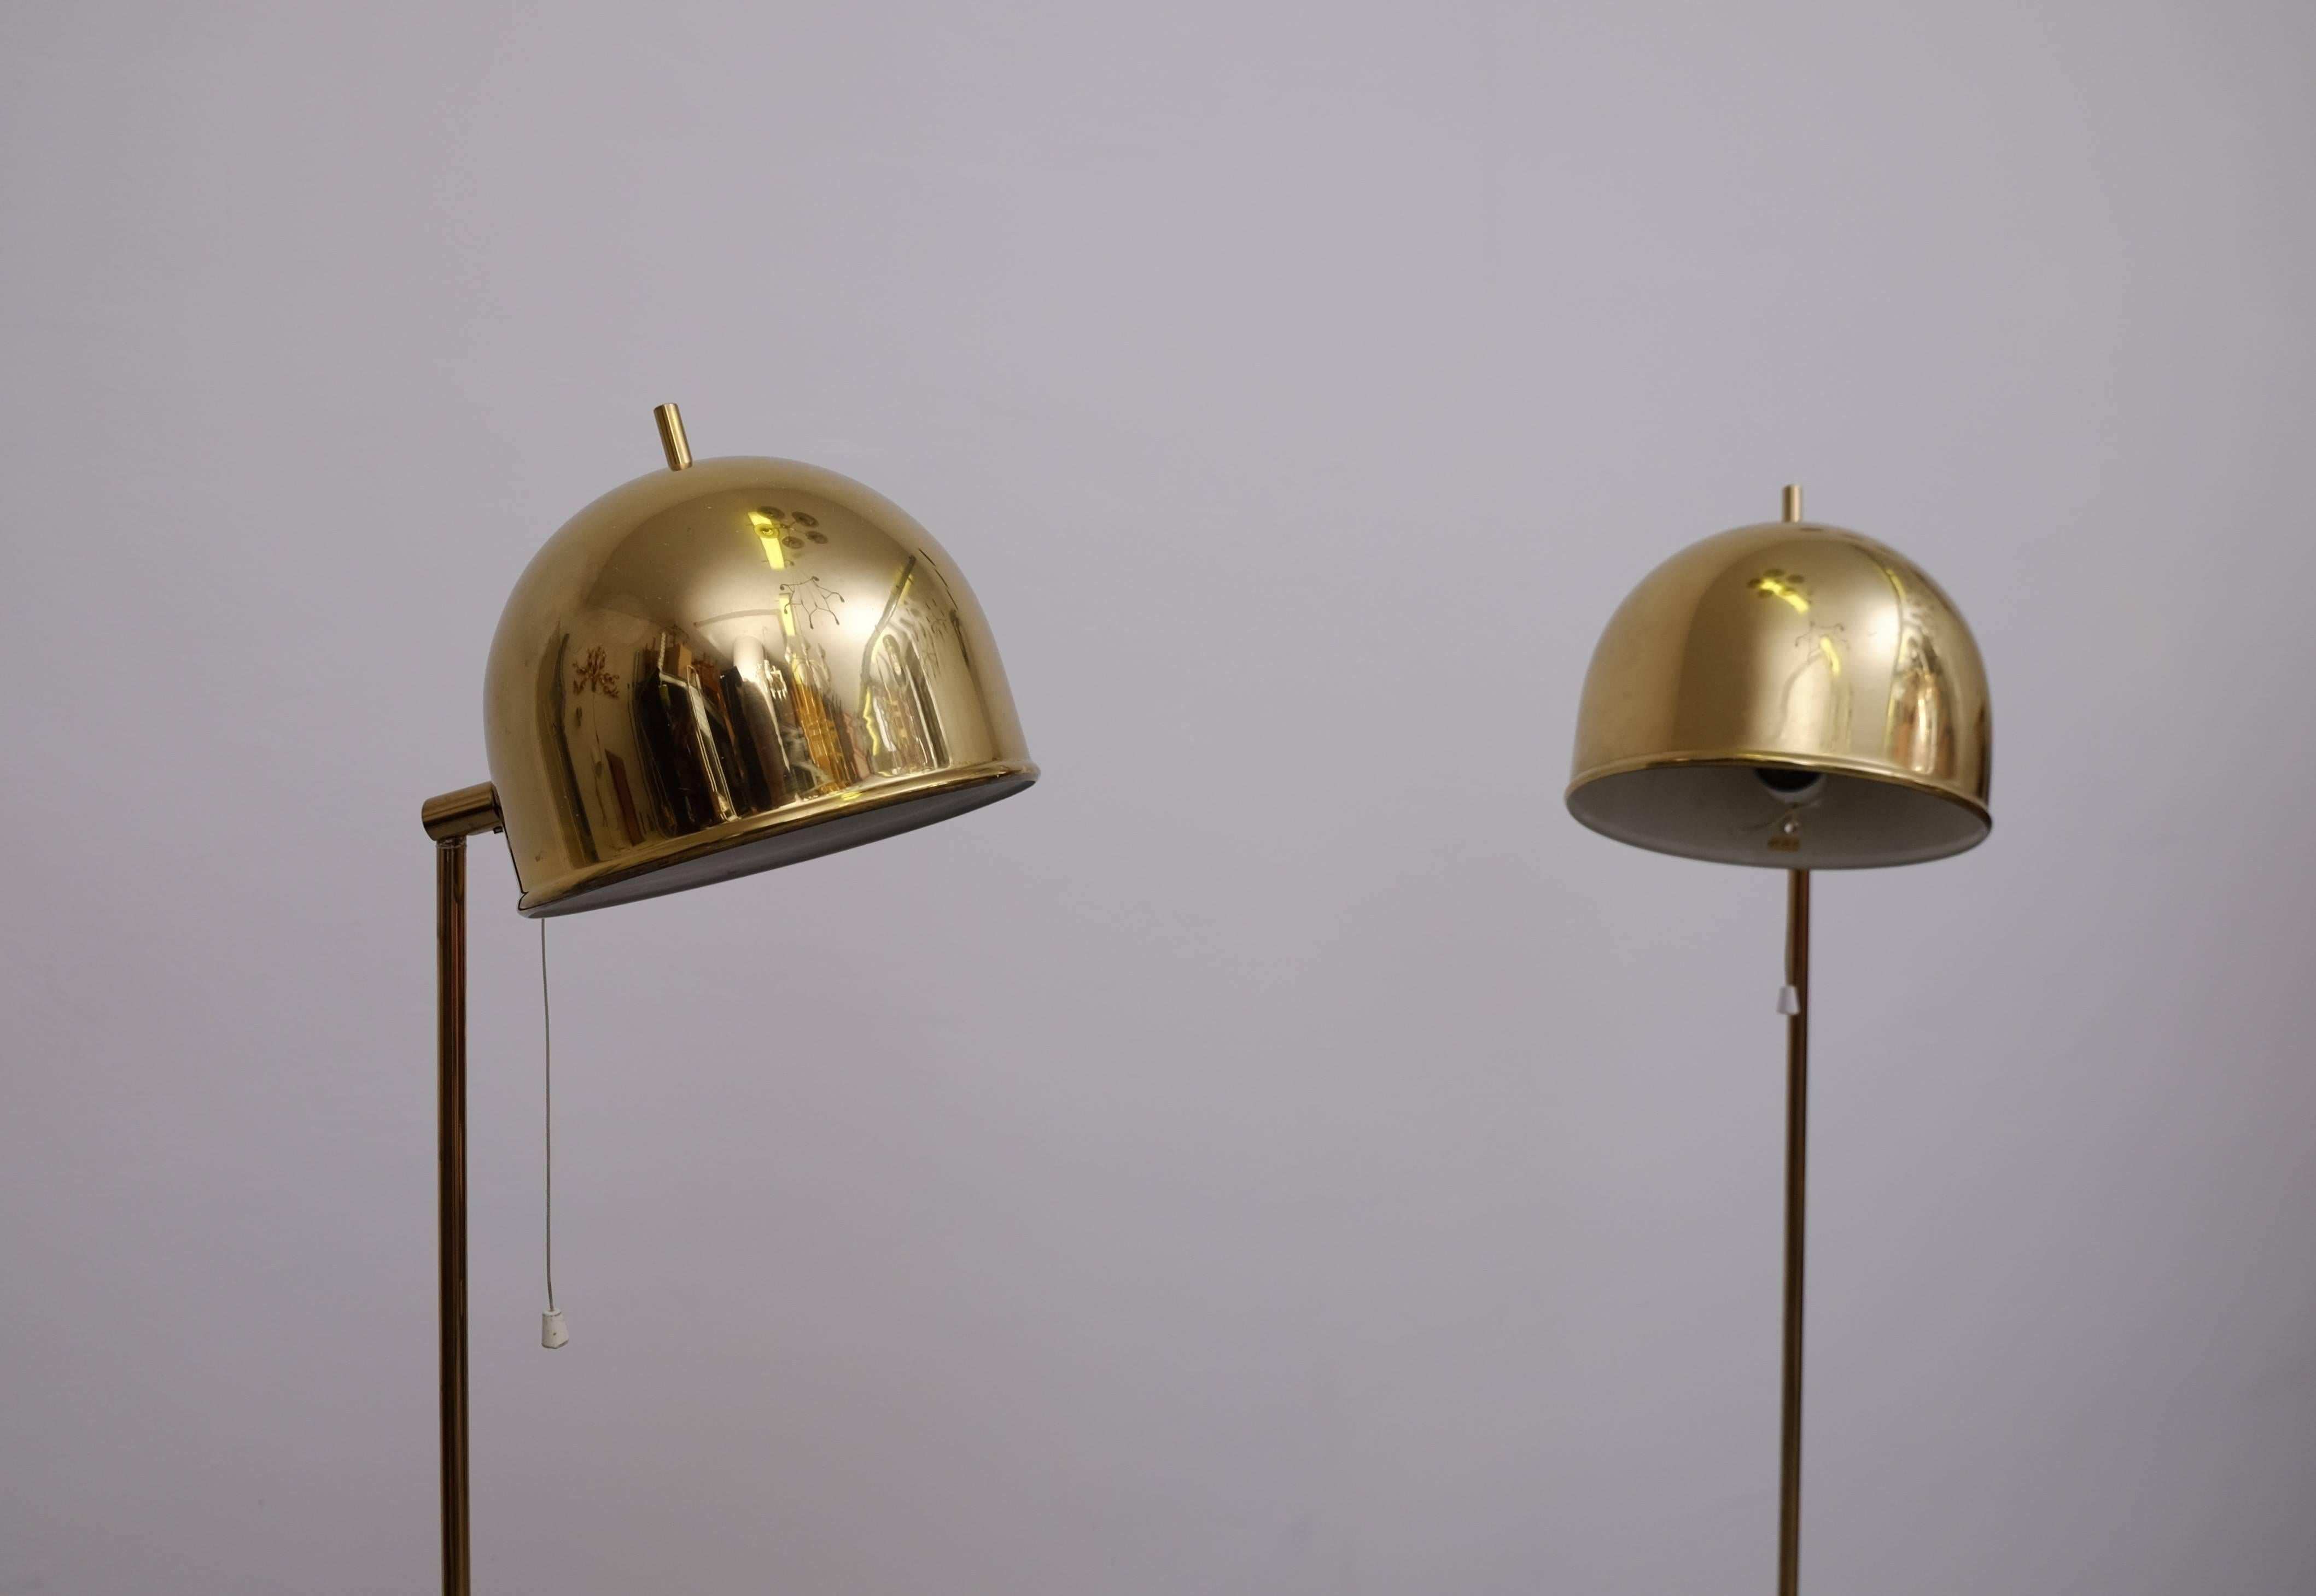 Set of two floor lamps in brass, model G-075 manufactured by Bergboms, Sweden, 1960s.